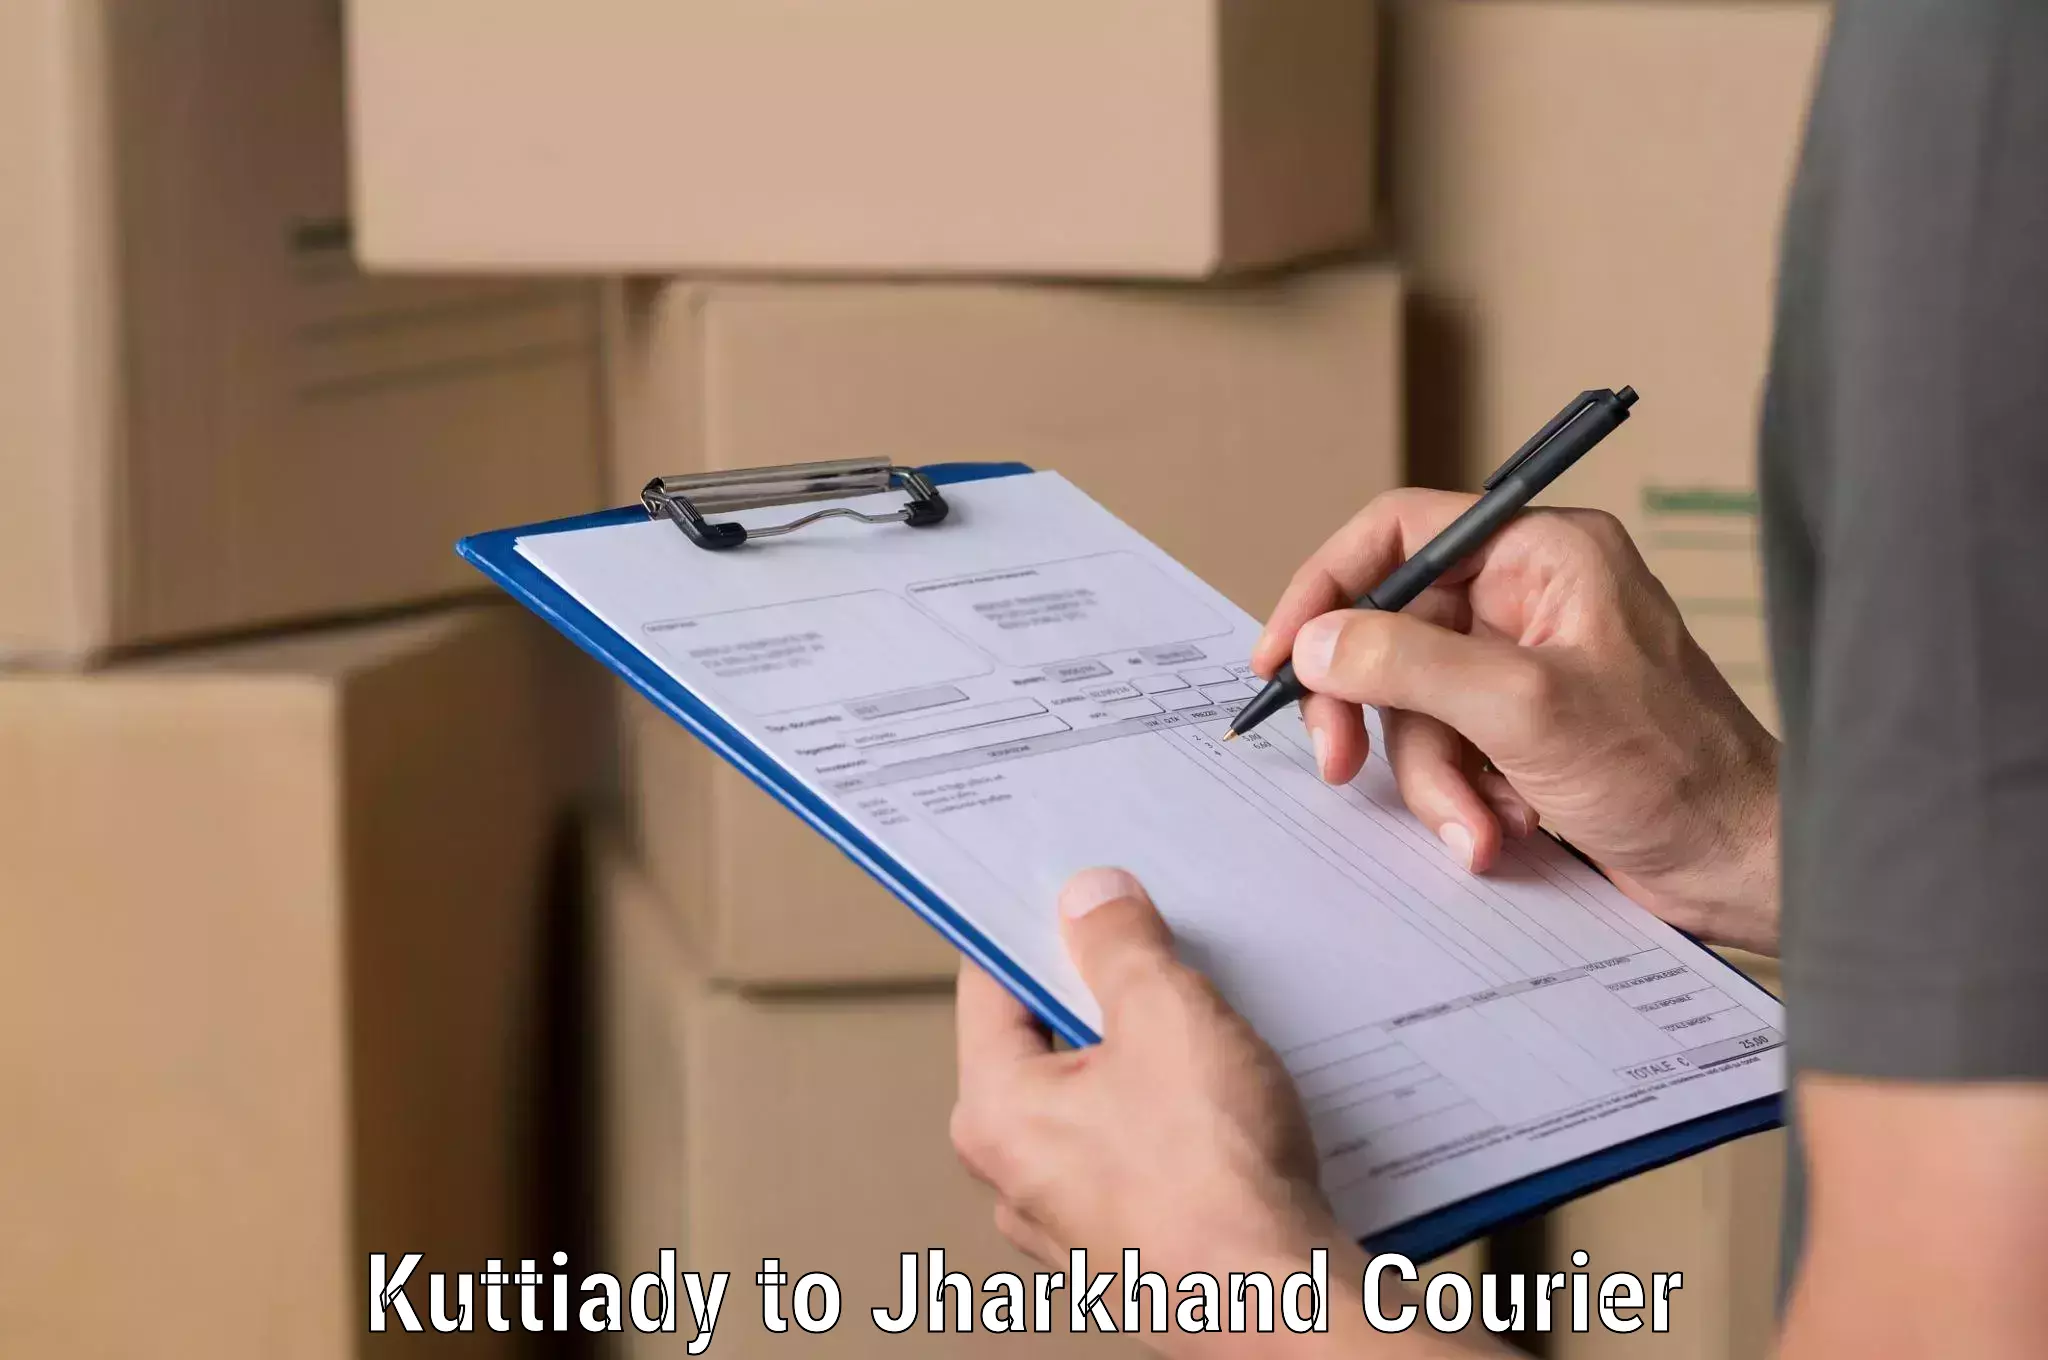 Overnight delivery in Kuttiady to Domchanch